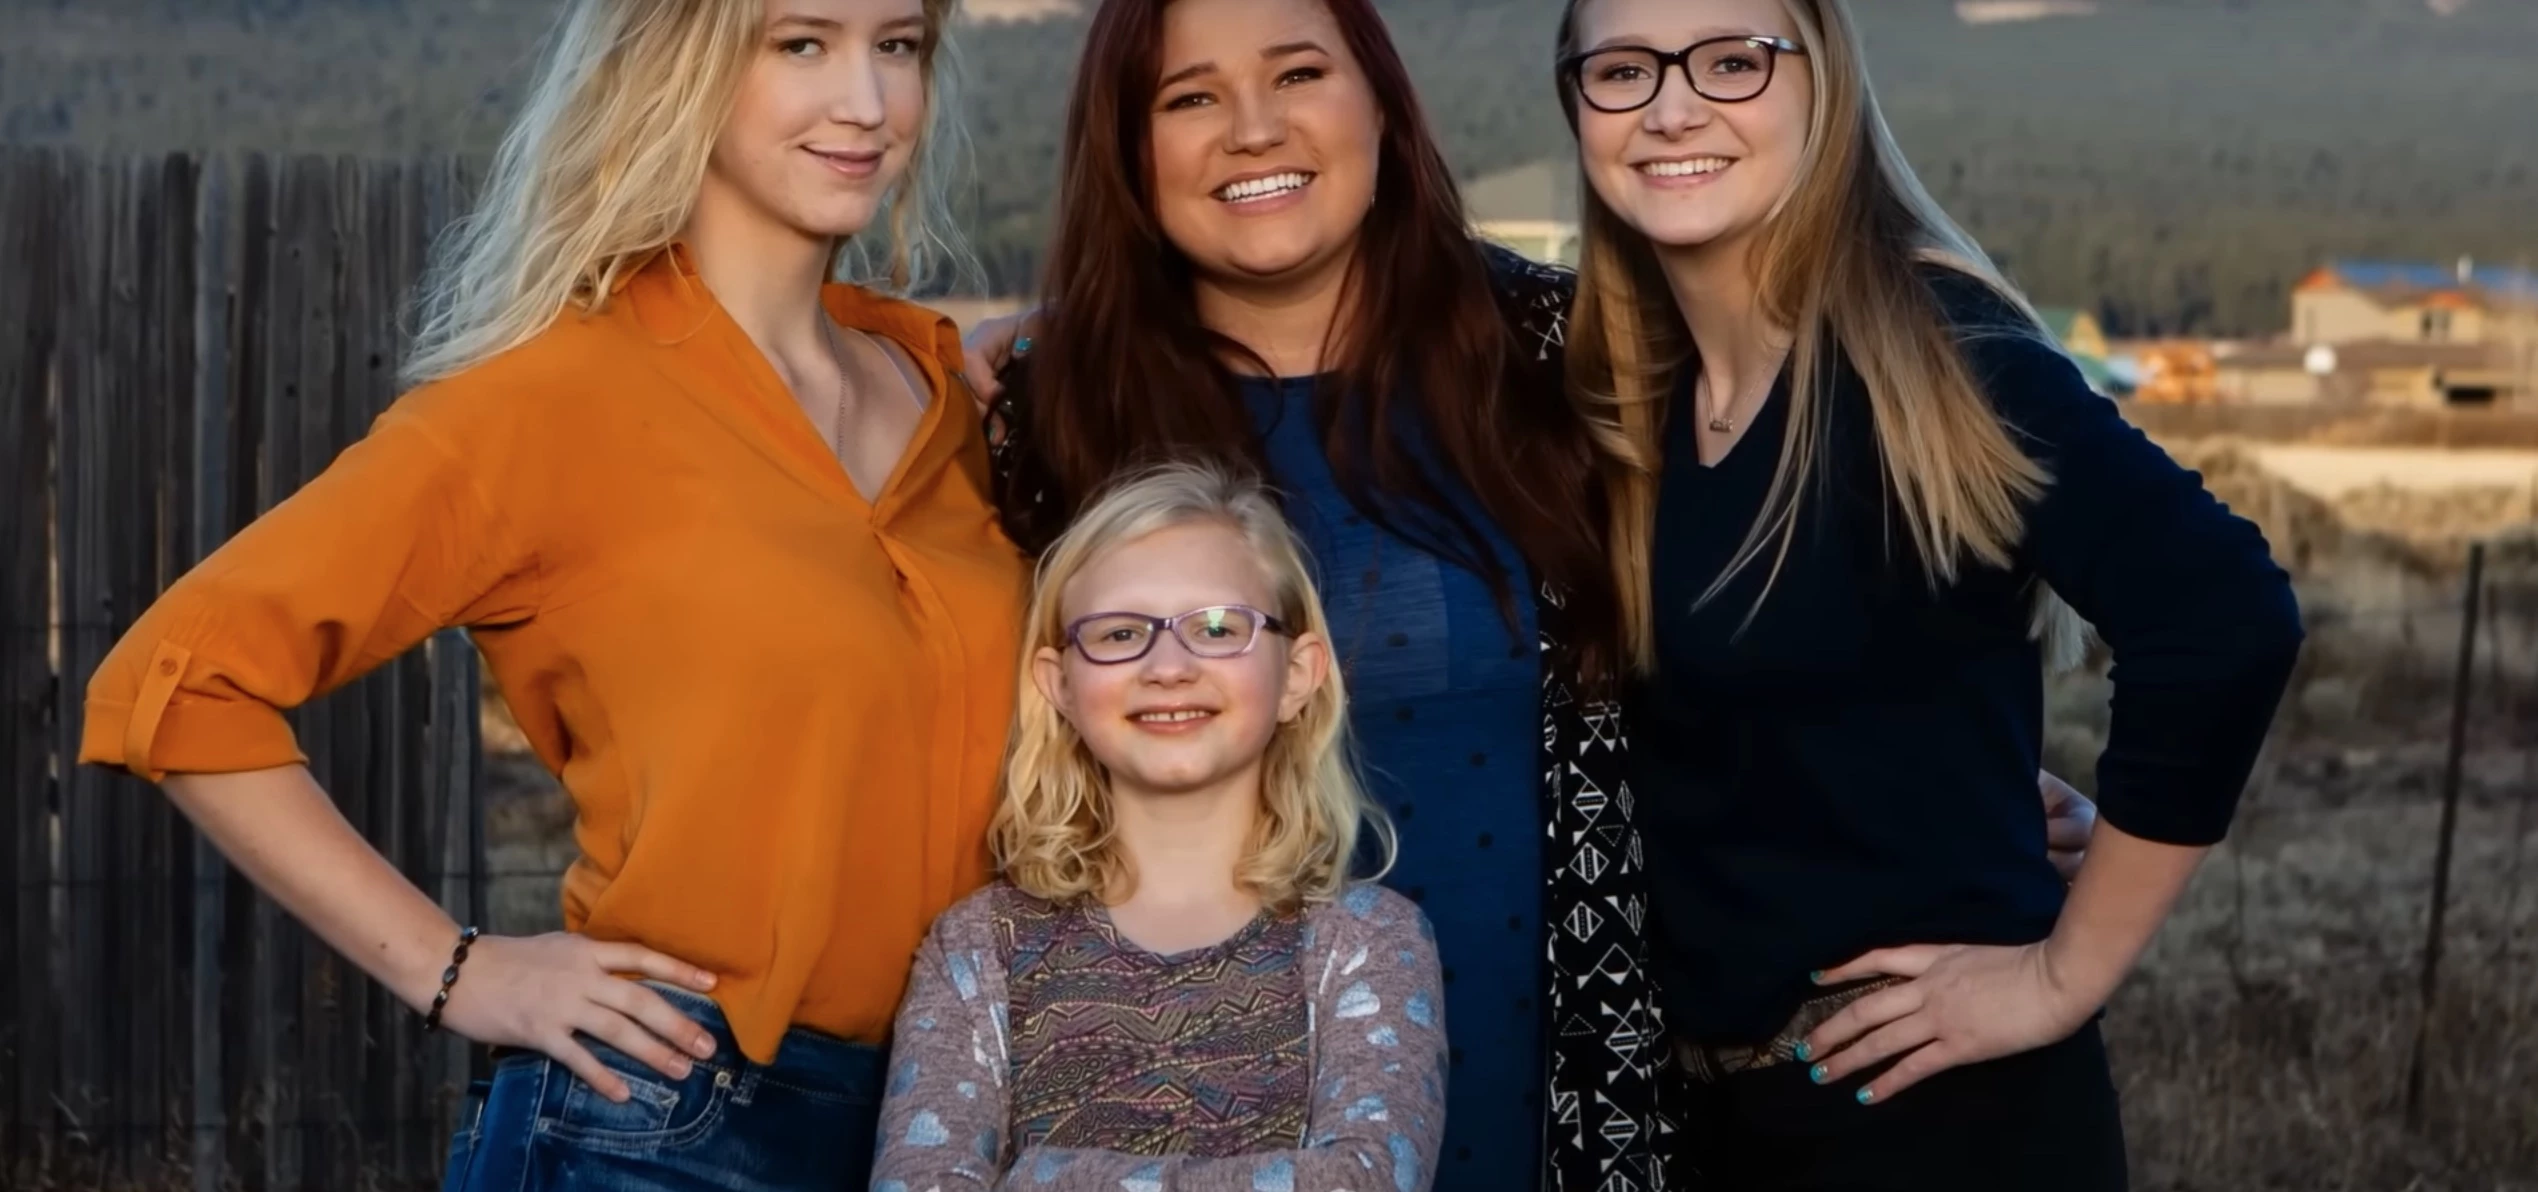 How old is Truely Brown from Sister Wives